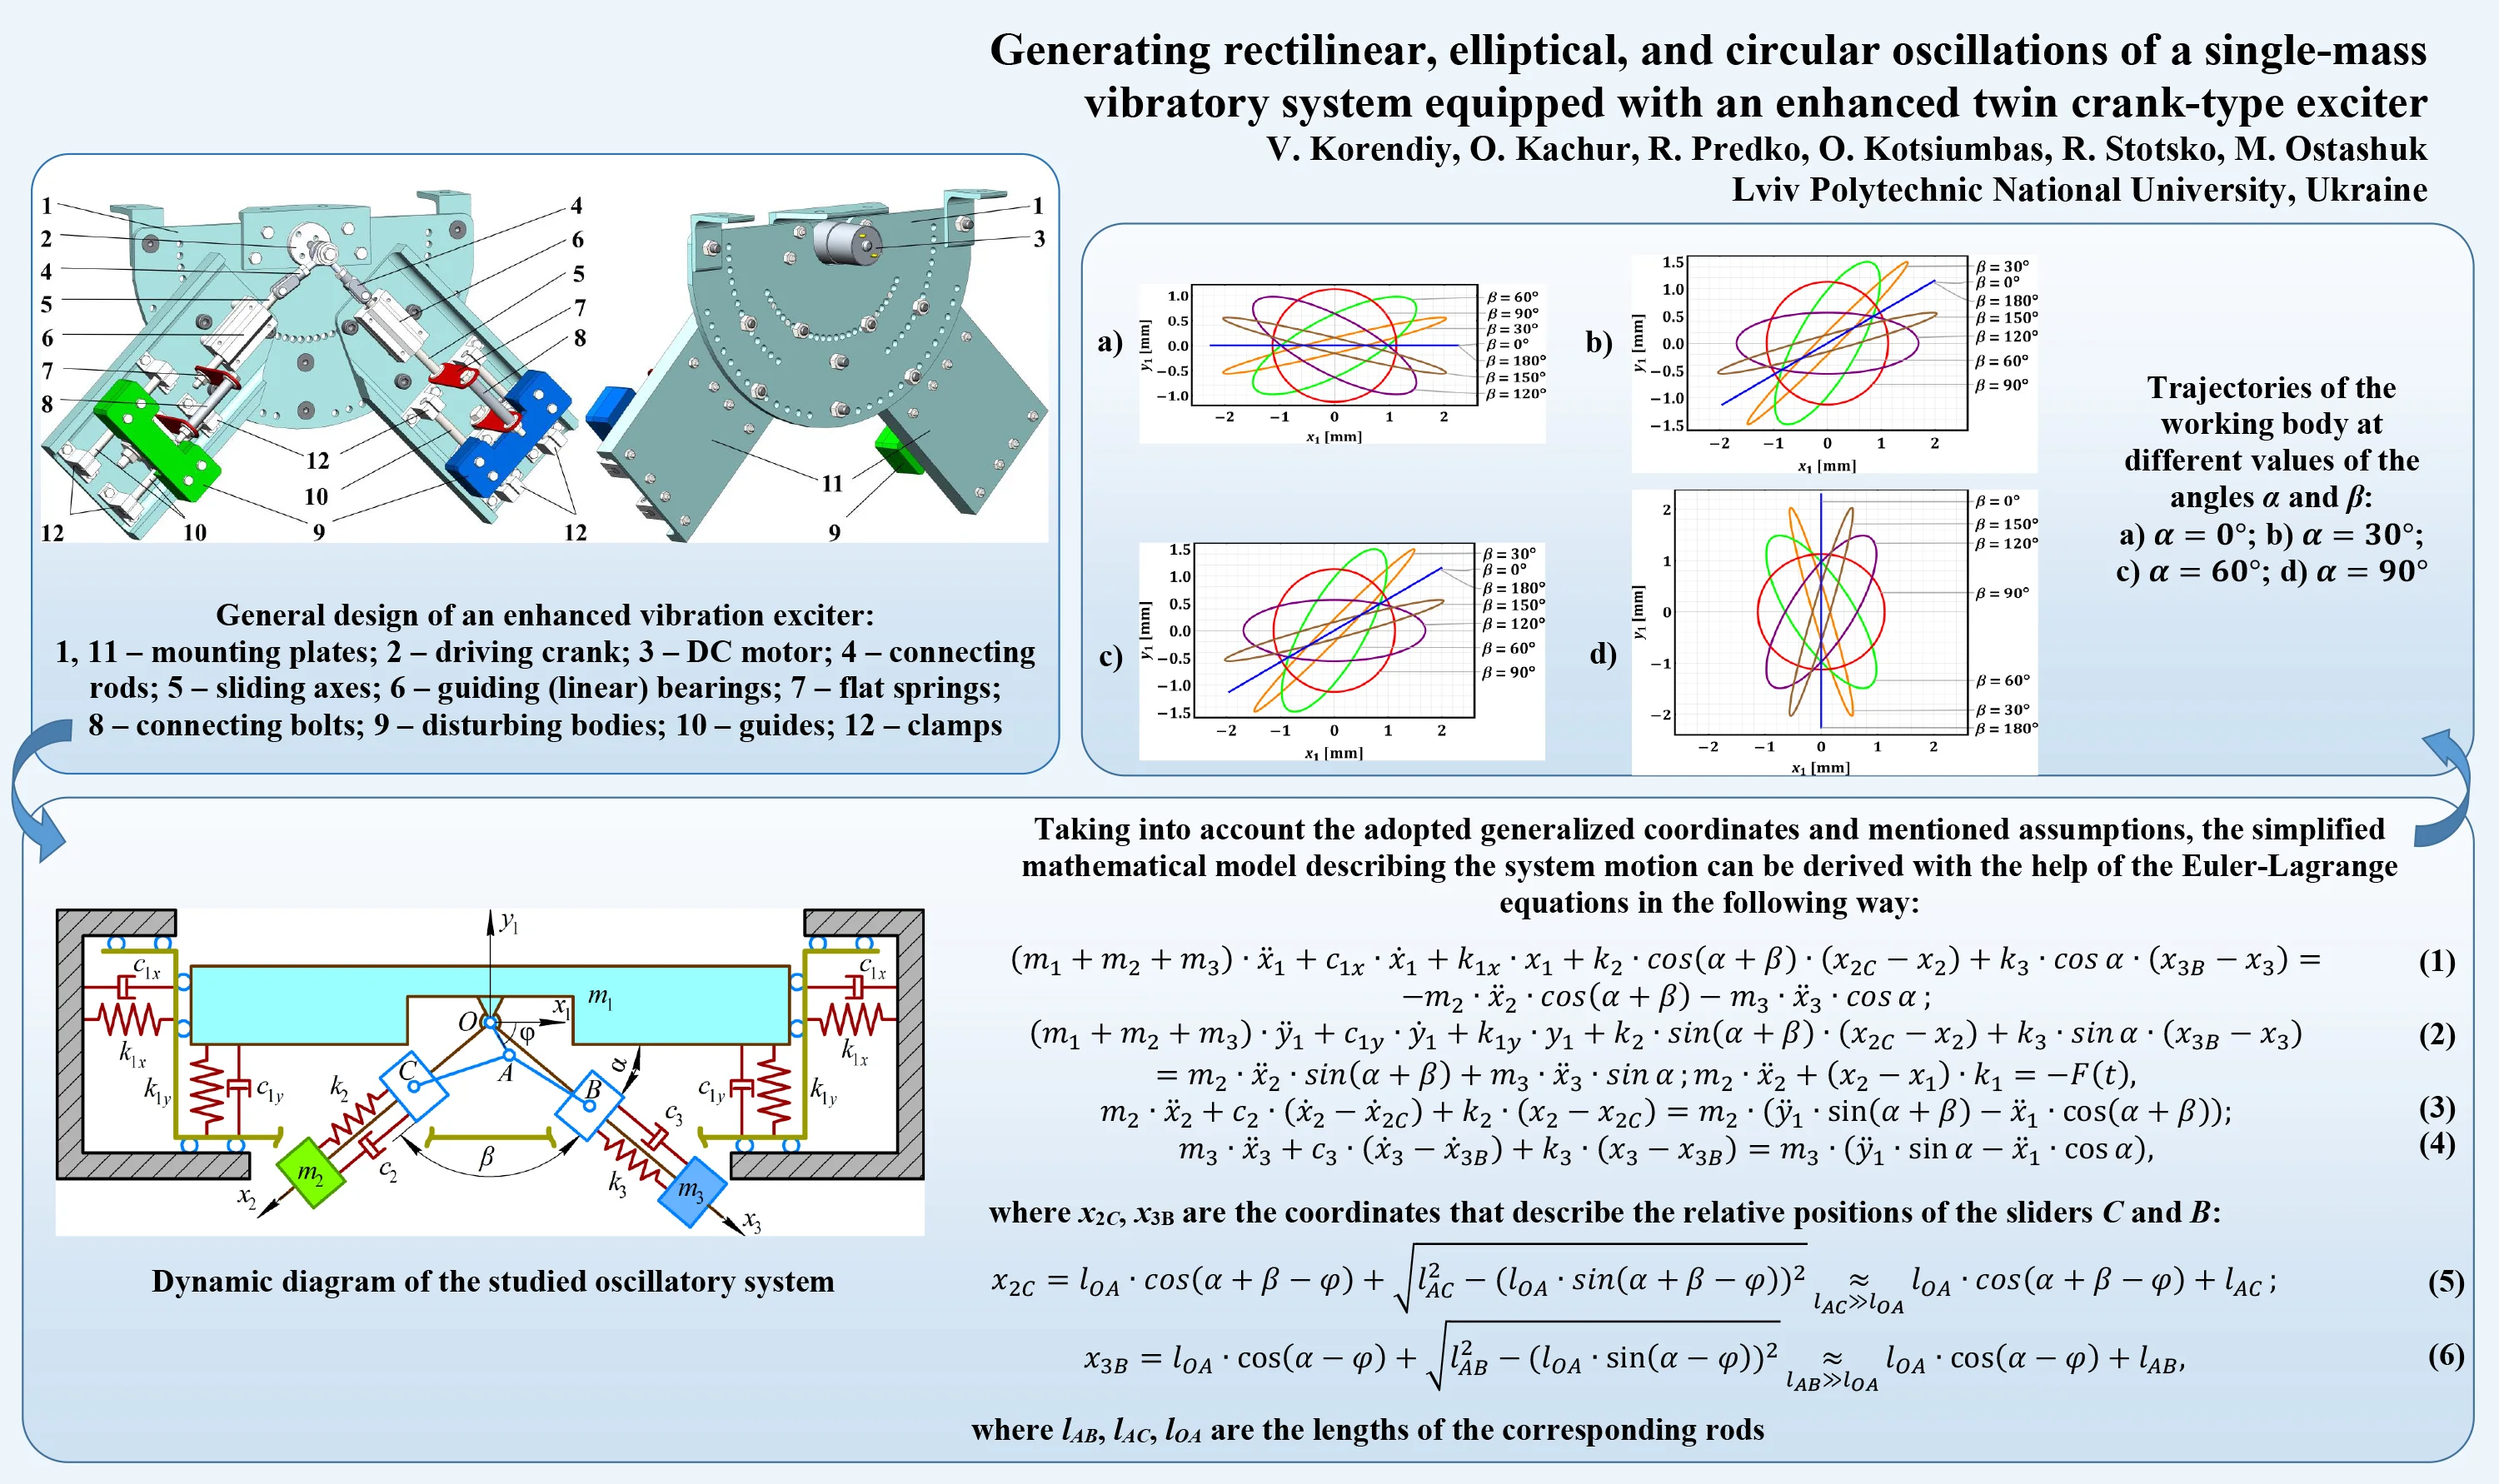 Generating rectilinear, elliptical, and circular oscillations of a single-mass vibratory system equipped with an enhanced twin crank-type exciter